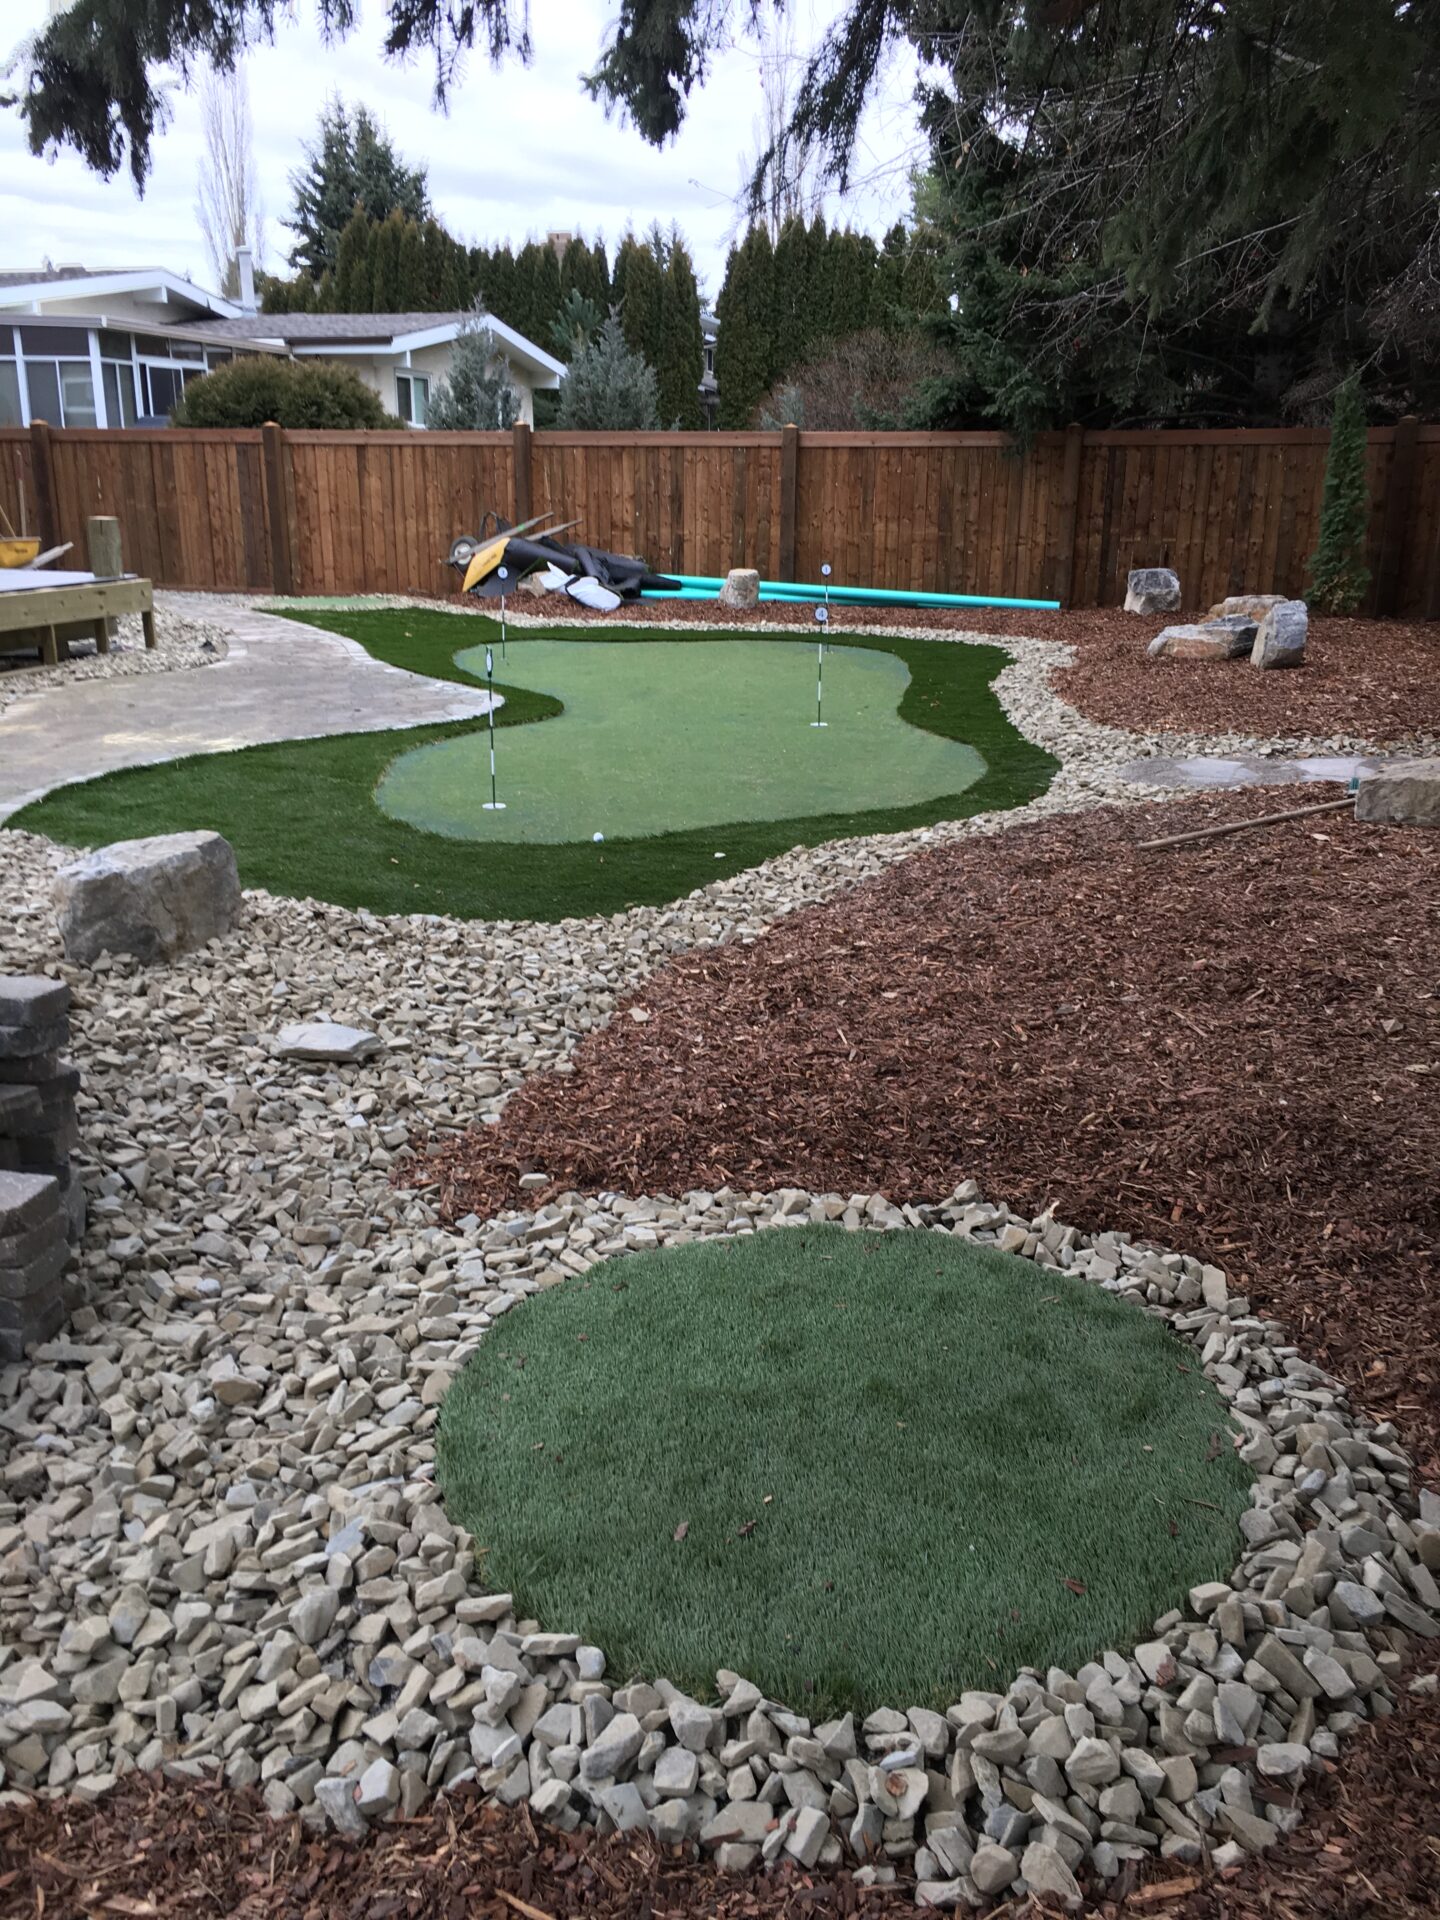 Fun Golf Landscaping Design Comes To Life In Sherwood Park Backyard